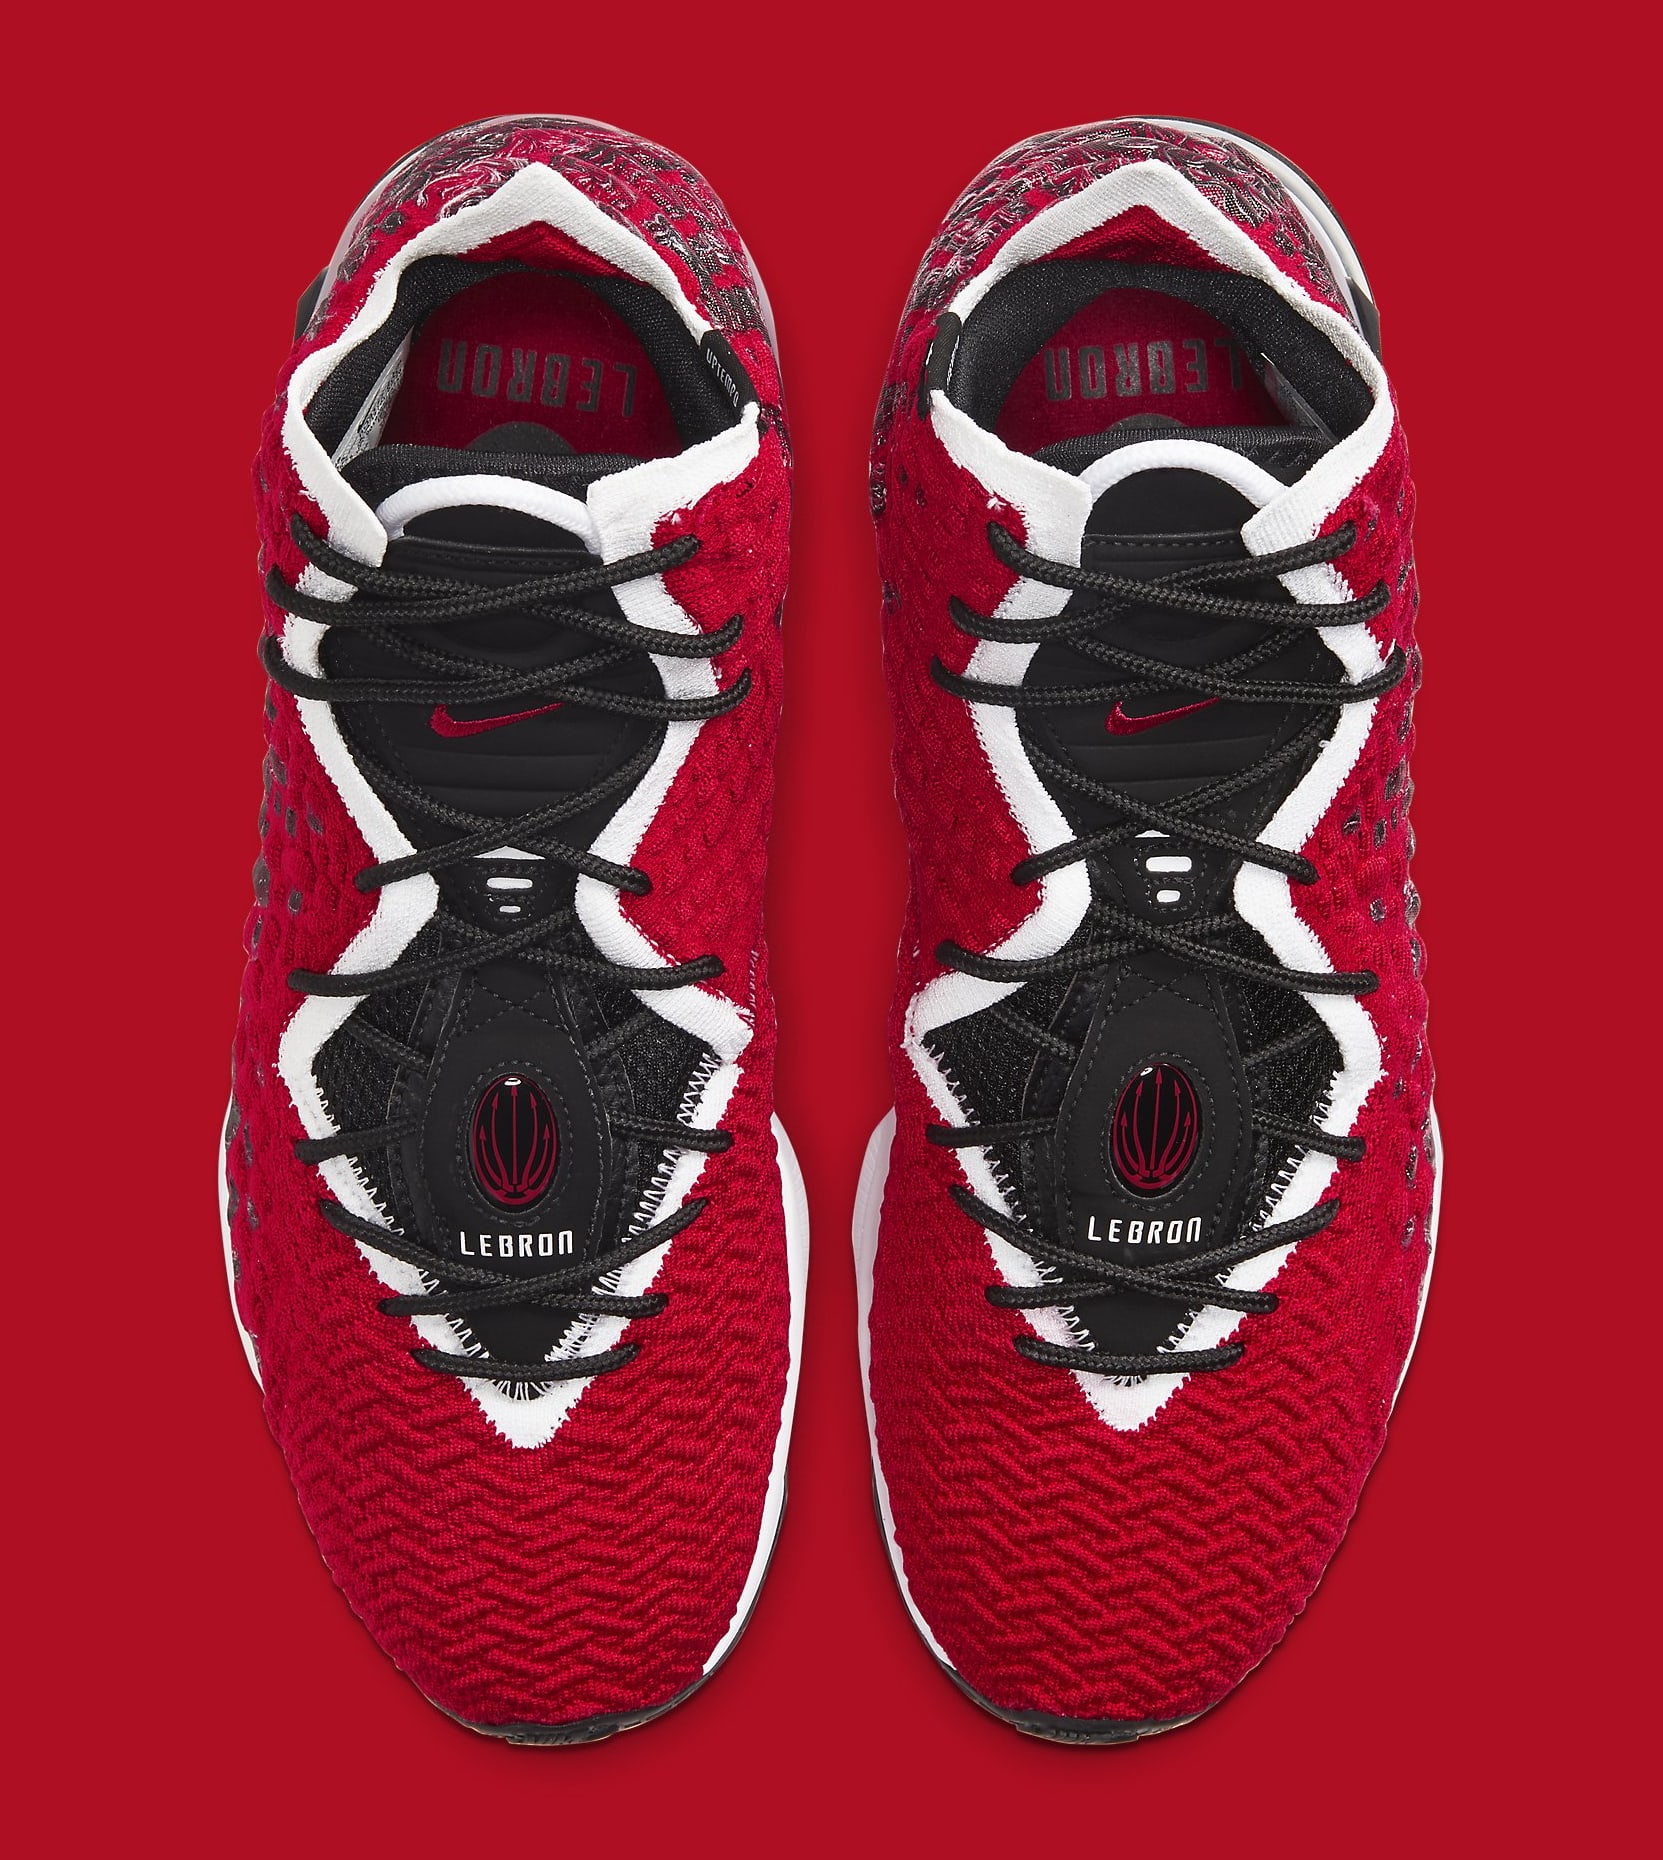 lebron 17 uptempo red